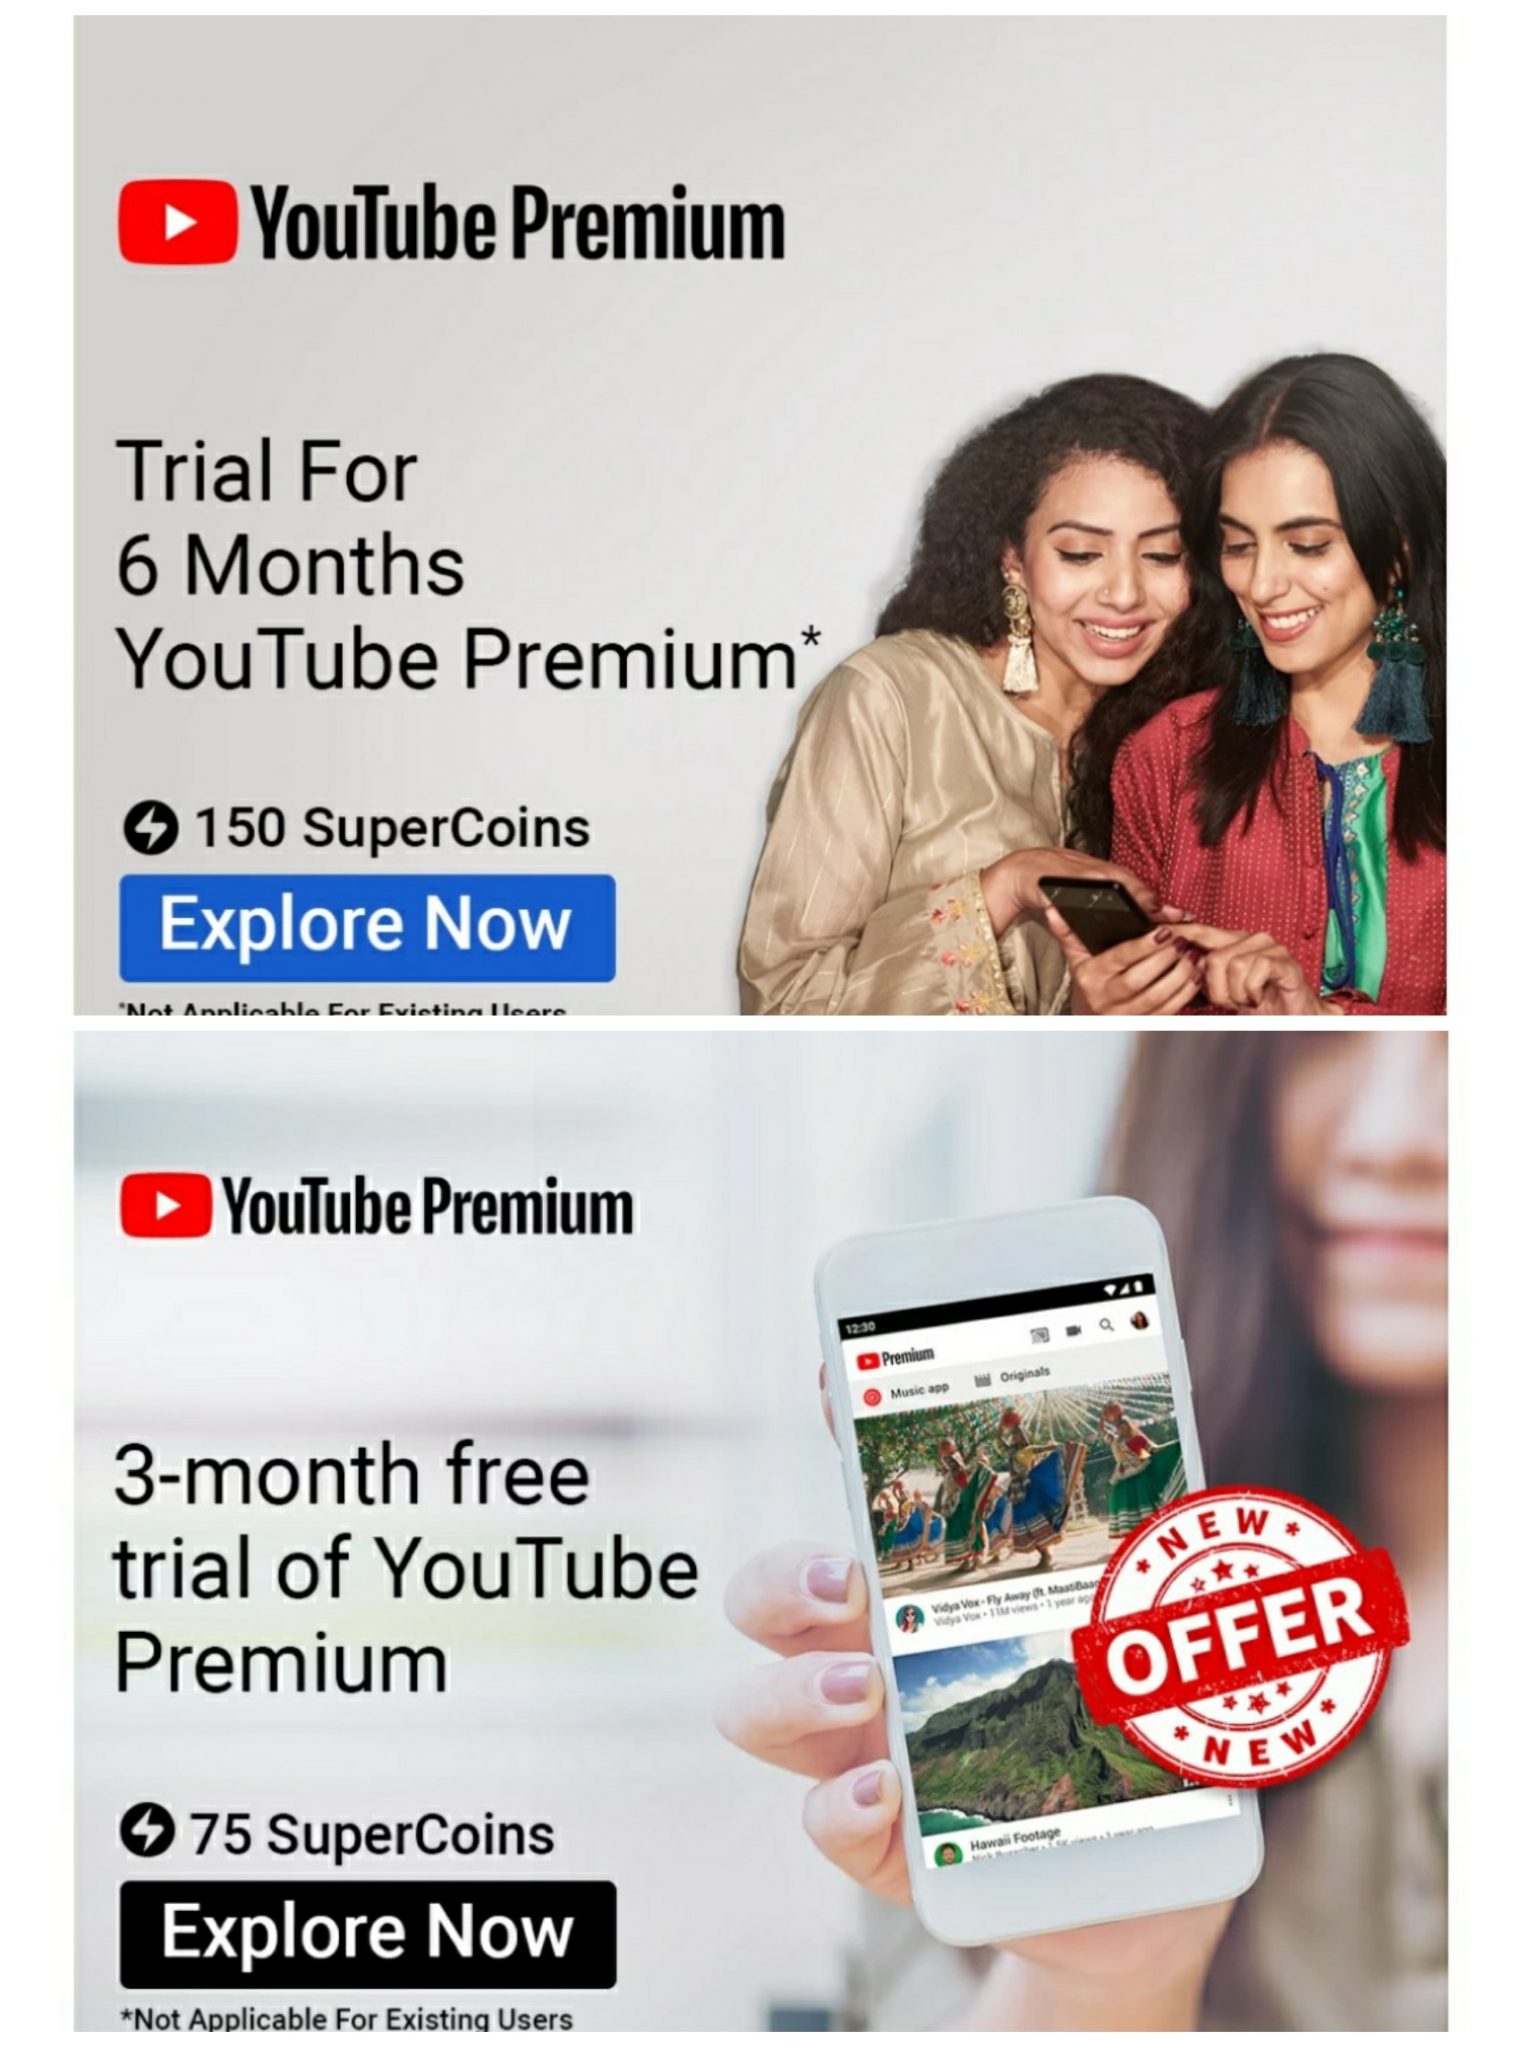 How To Get YouTube Premium 6 Months Subscription My Magic Trick